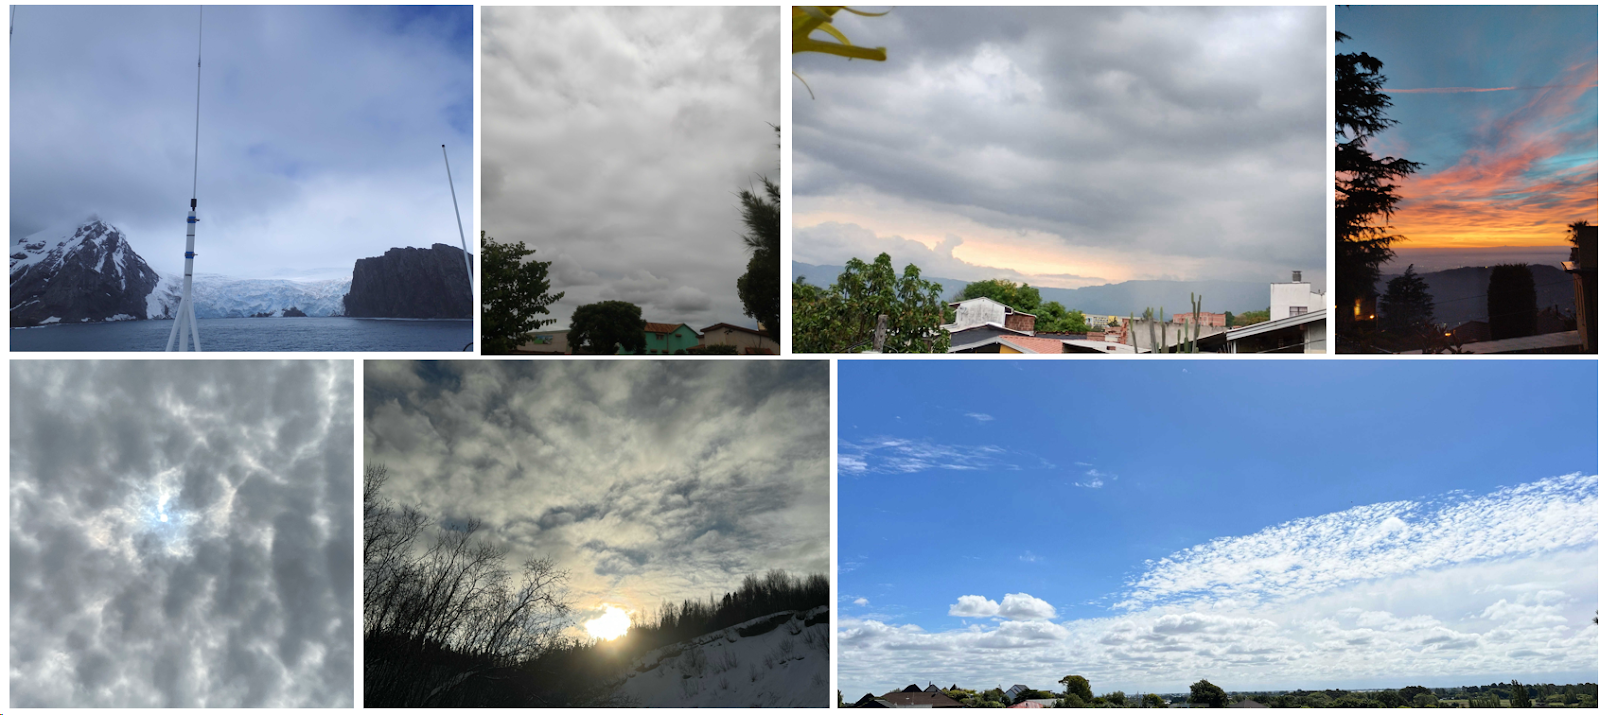 seven different photographs taken by GLOBE Observers of sky and clouds from around the world. The first one is an image of ice, mountains, and clouds taken from a ship. The second is a gray sky completely covered by clouds. The clouds look flat with some bulges to them. The third is taken in the horizon and you can see clouds, mountains, and houses. The clouds are layered and look gray. You can also see orange colors in the horizon. The fourth is a photo of thing clouds in the horizon with orange colors in the bottom and gray to dark blue on the top. The fifth image is of altocumulus clouds that look like gray cotton balls all smooshed together and the sun slightly visible right on the center. The sixth is an image of the sun peaking over mountains, trees, and snow, and mid level clouds. The last image is of blue skies to the top of the image and a line of cumulus clouds and stratus clouds covering the bottom of the image. 